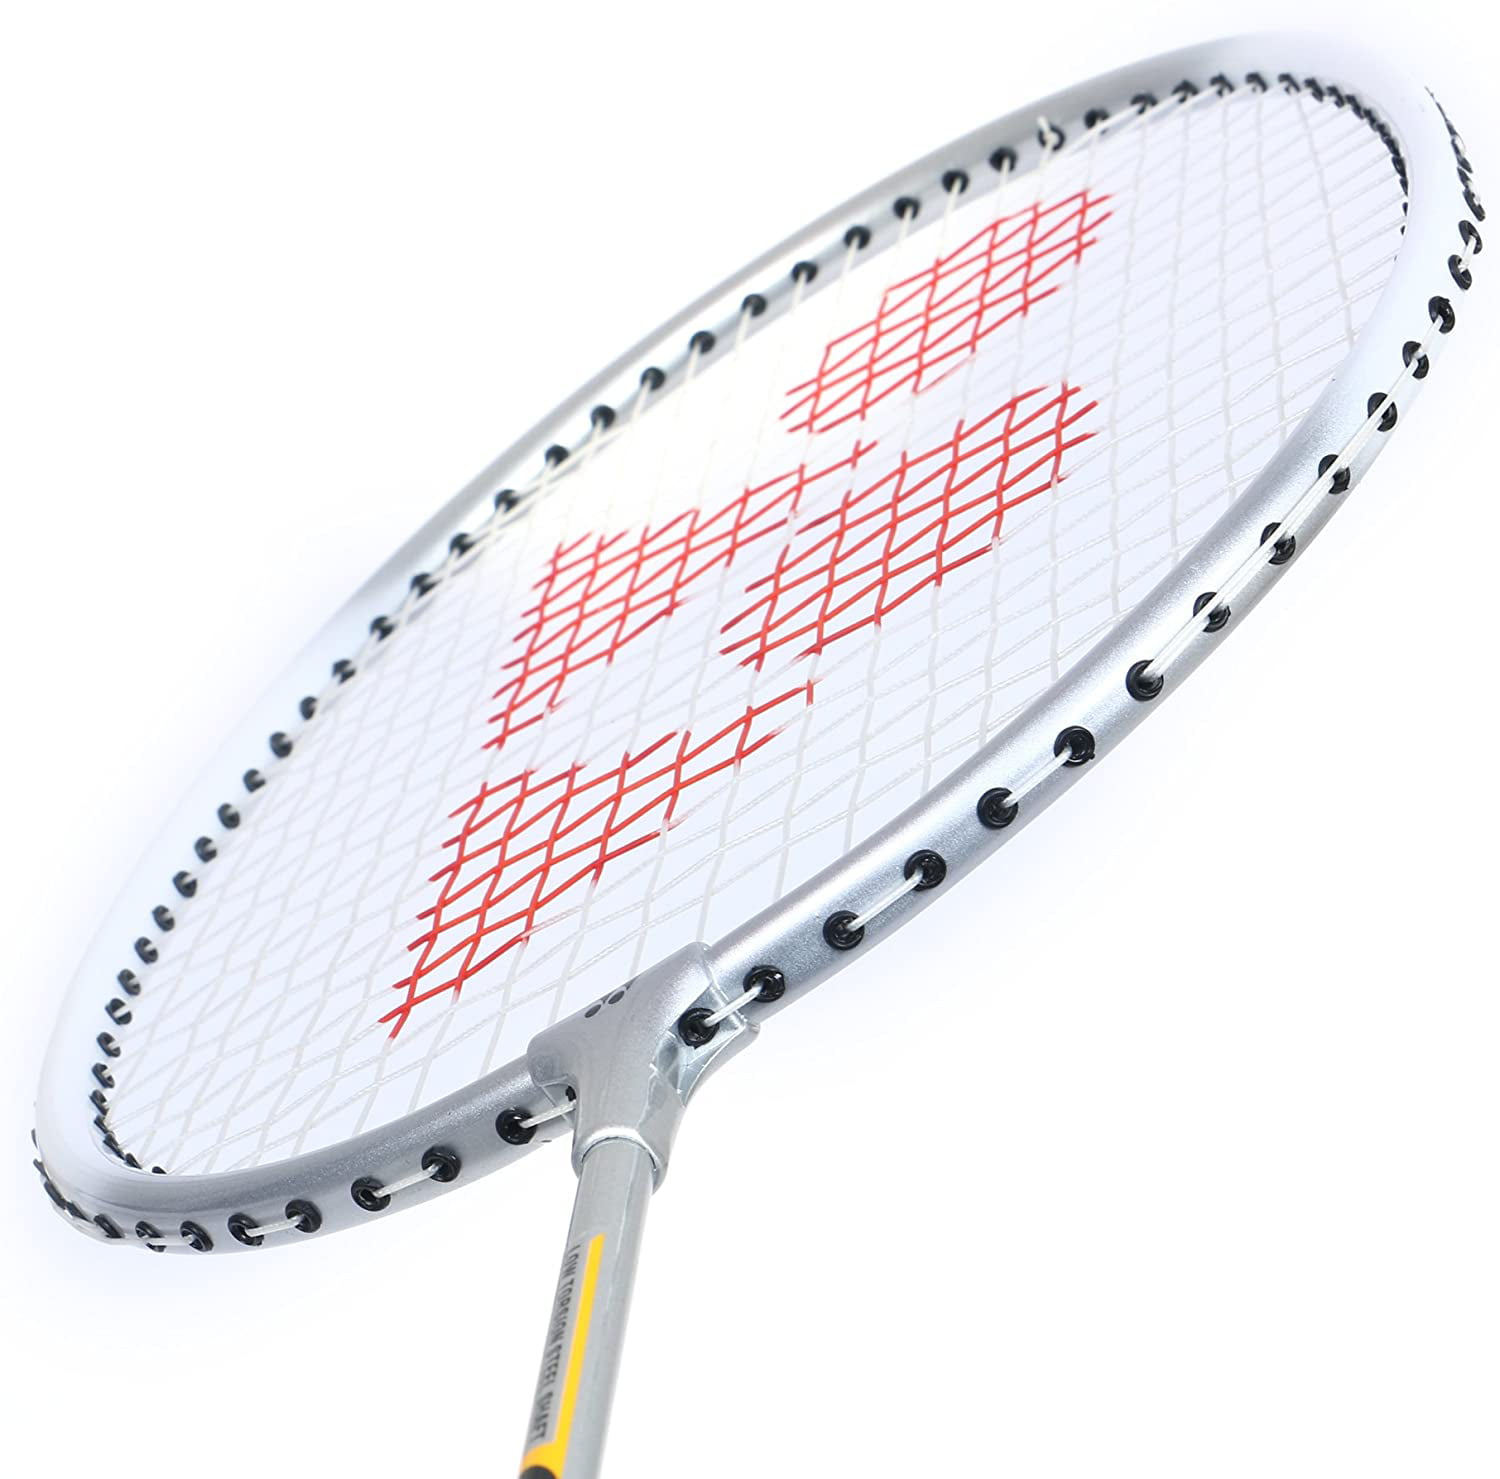 YONEX GR 303 Badminton Racket 2018 Professional Beginner Practice Racquet with Face Cover, Silver Pack of 2